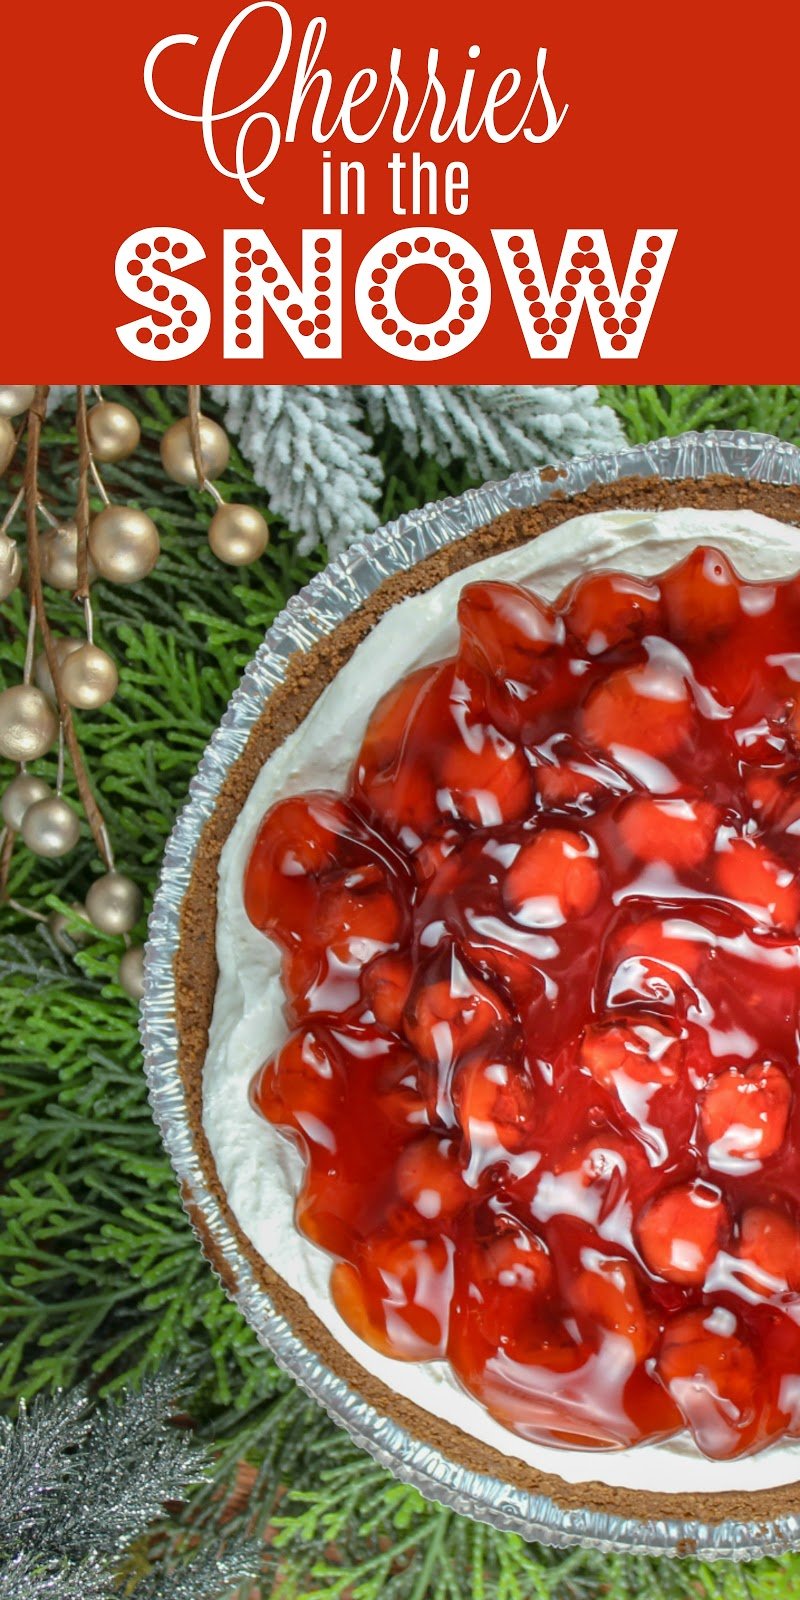 This Cherries in the snow is a family recipe that I now CRAVE! It's a super simple no bake cherry cheesecake and your family will be begging for it every year! via @foodhussy